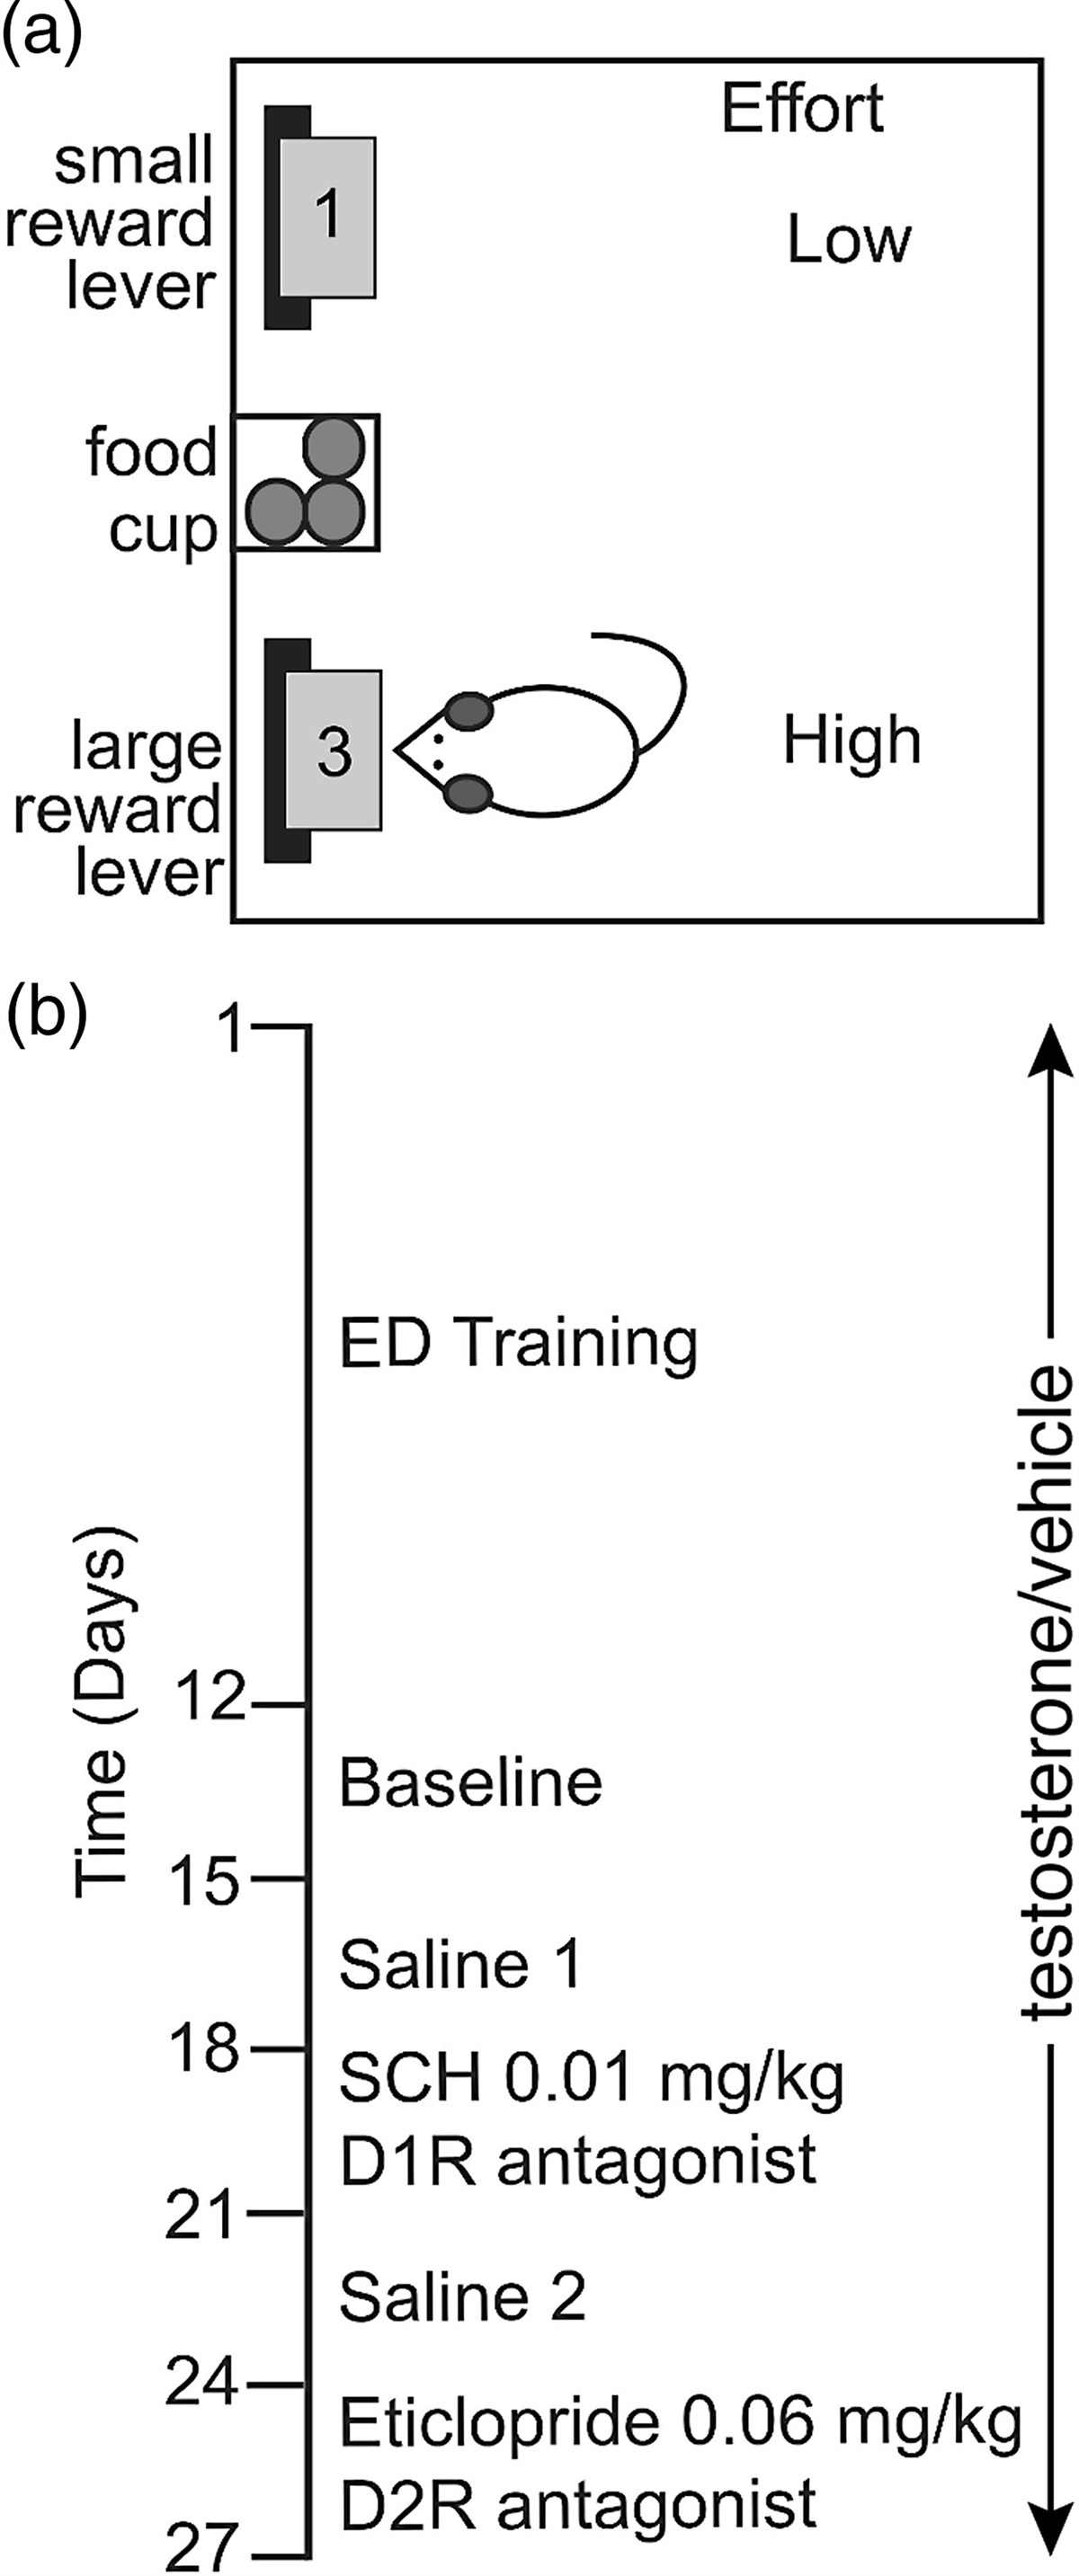 Effort-based decision making in response to high-dose androgens: role of dopamine receptors